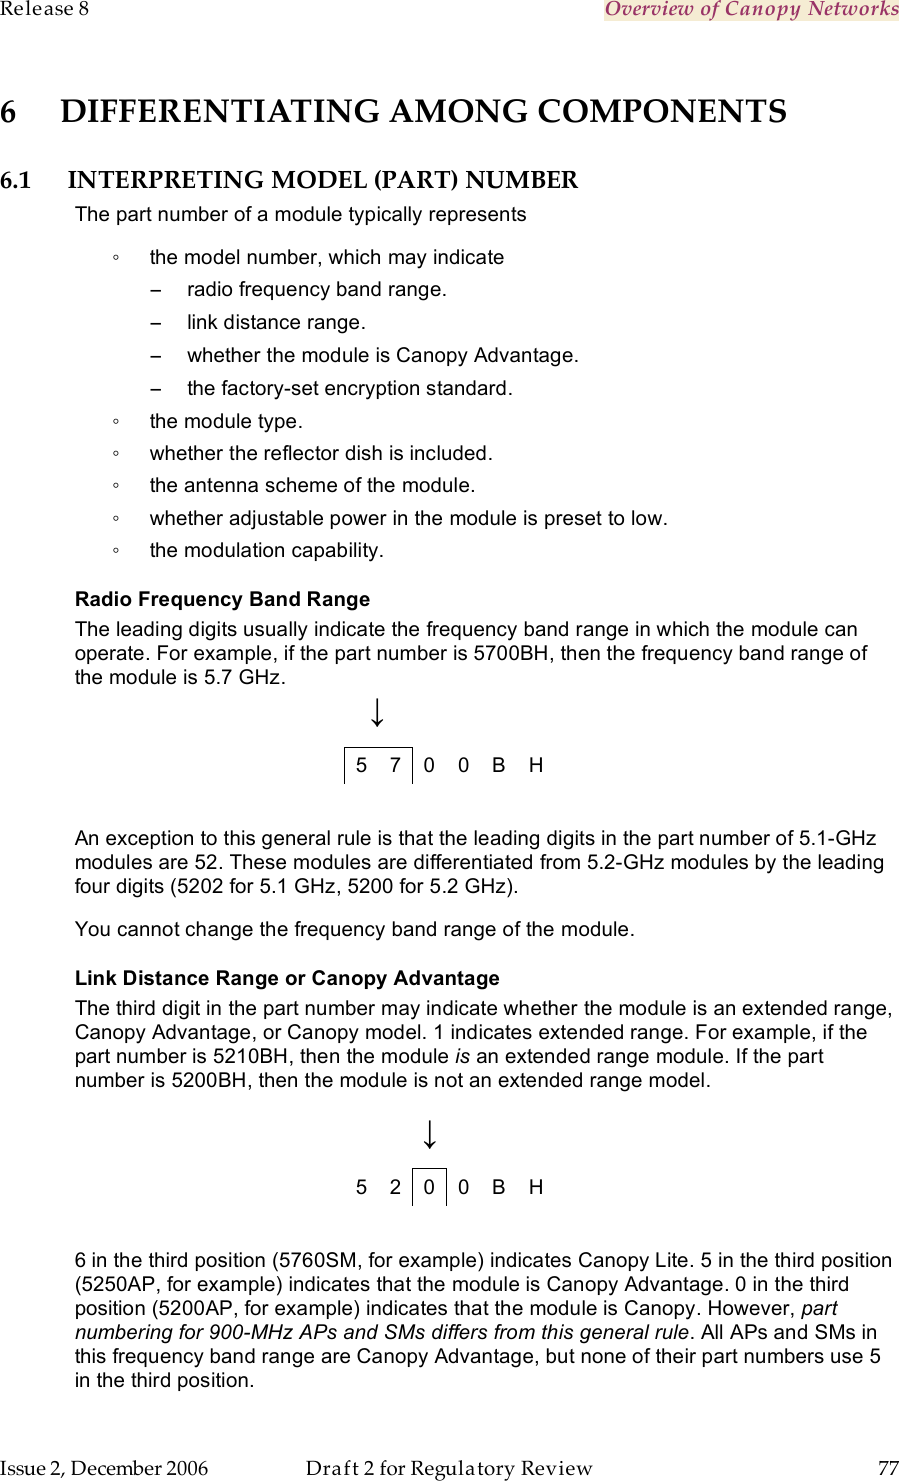 Release 8    Overview of Canopy Networks                  March 200                  Through Software Release 6.   Issue 2, December 2006  Draft 2 for Regulatory Review  77     6 DIFFERENTIATING AMONG COMPONENTS 6.1 INTERPRETING MODEL (PART) NUMBER The part number of a module typically represents  ◦  the model number, which may indicate −  radio frequency band range. −  link distance range. −  whether the module is Canopy Advantage. −  the factory-set encryption standard. ◦  the module type. ◦  whether the reflector dish is included. ◦  the antenna scheme of the module. ◦  whether adjustable power in the module is preset to low. ◦  the modulation capability. Radio Frequency Band Range The leading digits usually indicate the frequency band range in which the module can operate. For example, if the part number is 5700BH, then the frequency band range of the module is 5.7 GHz.                                         ↓ 5 7 0 0 B H  An exception to this general rule is that the leading digits in the part number of 5.1-GHz modules are 52. These modules are differentiated from 5.2-GHz modules by the leading four digits (5202 for 5.1 GHz, 5200 for 5.2 GHz). You cannot change the frequency band range of the module. Link Distance Range or Canopy Advantage The third digit in the part number may indicate whether the module is an extended range, Canopy Advantage, or Canopy model. 1 indicates extended range. For example, if the part number is 5210BH, then the module is an extended range module. If the part number is 5200BH, then the module is not an extended range model.                                        ↓ 5 2 0 0 B H  6 in the third position (5760SM, for example) indicates Canopy Lite. 5 in the third position (5250AP, for example) indicates that the module is Canopy Advantage. 0 in the third position (5200AP, for example) indicates that the module is Canopy. However, part numbering for 900-MHz APs and SMs differs from this general rule. All APs and SMs in this frequency band range are Canopy Advantage, but none of their part numbers use 5 in the third position. 